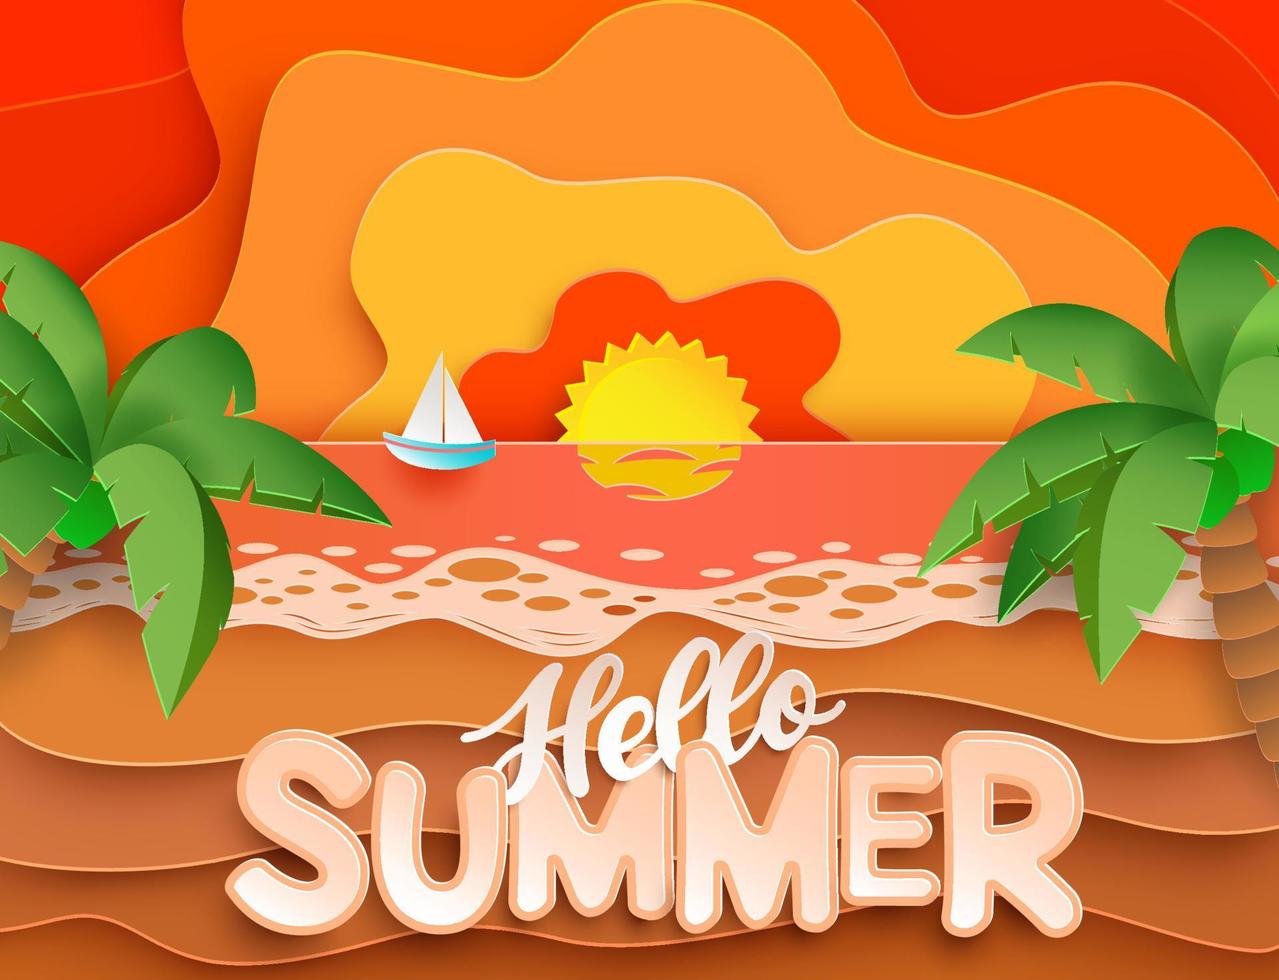 Hello summer vector banner design. Hello summer text in sunset beach paper cut background with palm tree and sailing boat element for tropical holiday season vacation. Vector illustration